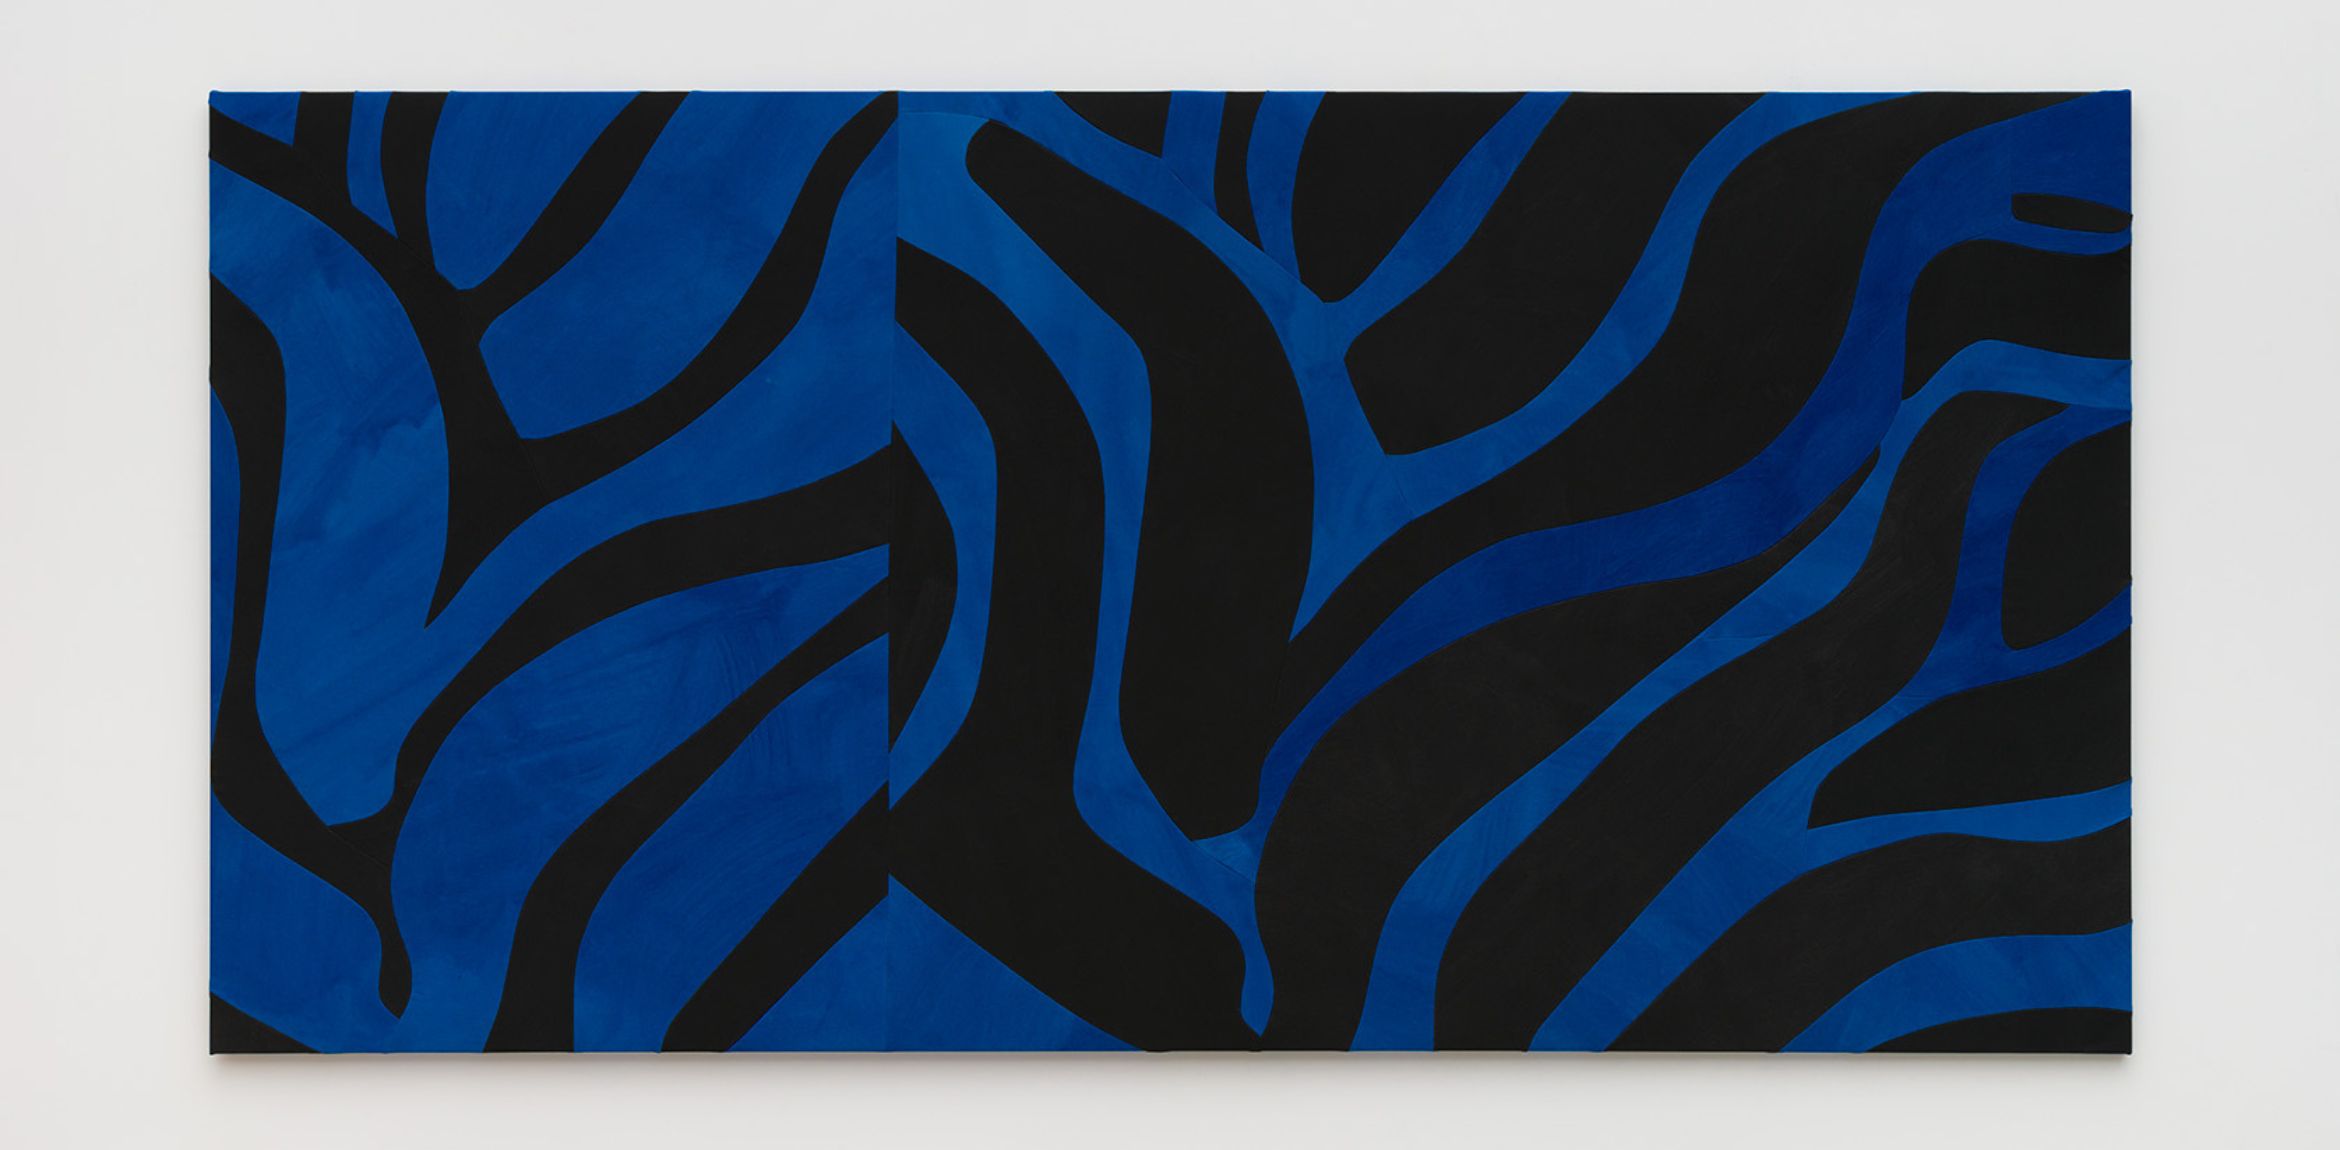 Sarah Crowner's blue and black abstract painting.